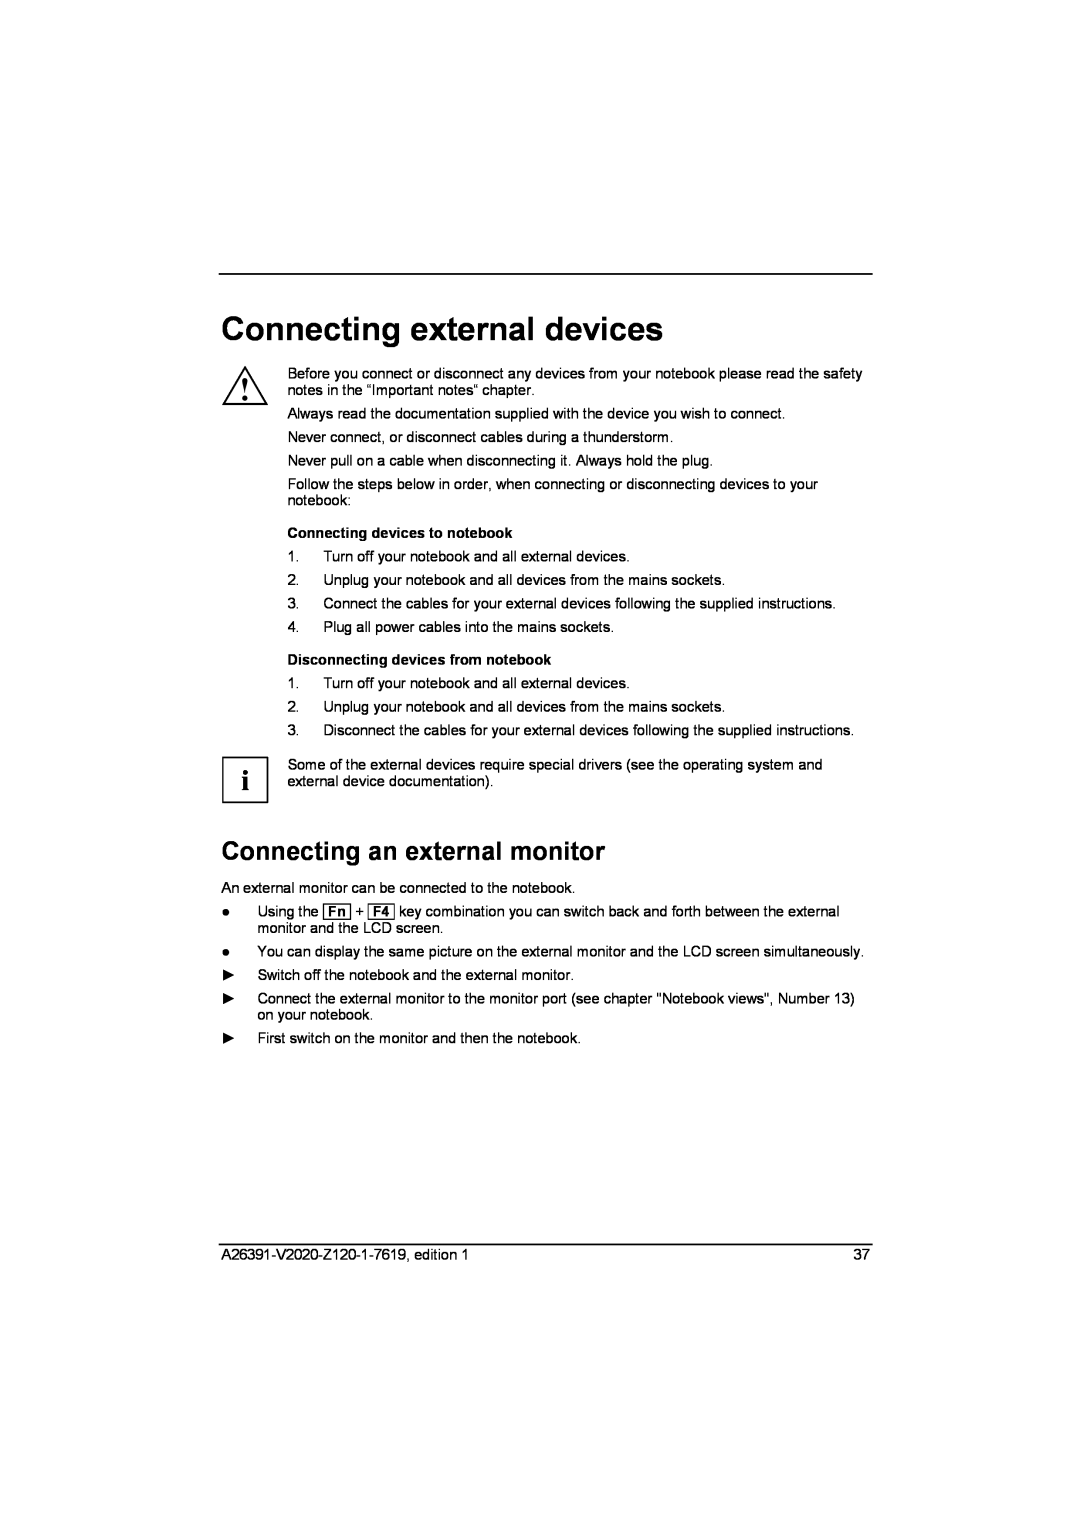 Fujitsu Siemens Computers V2020 manual Connecting external devices, Connecting an external monitor 